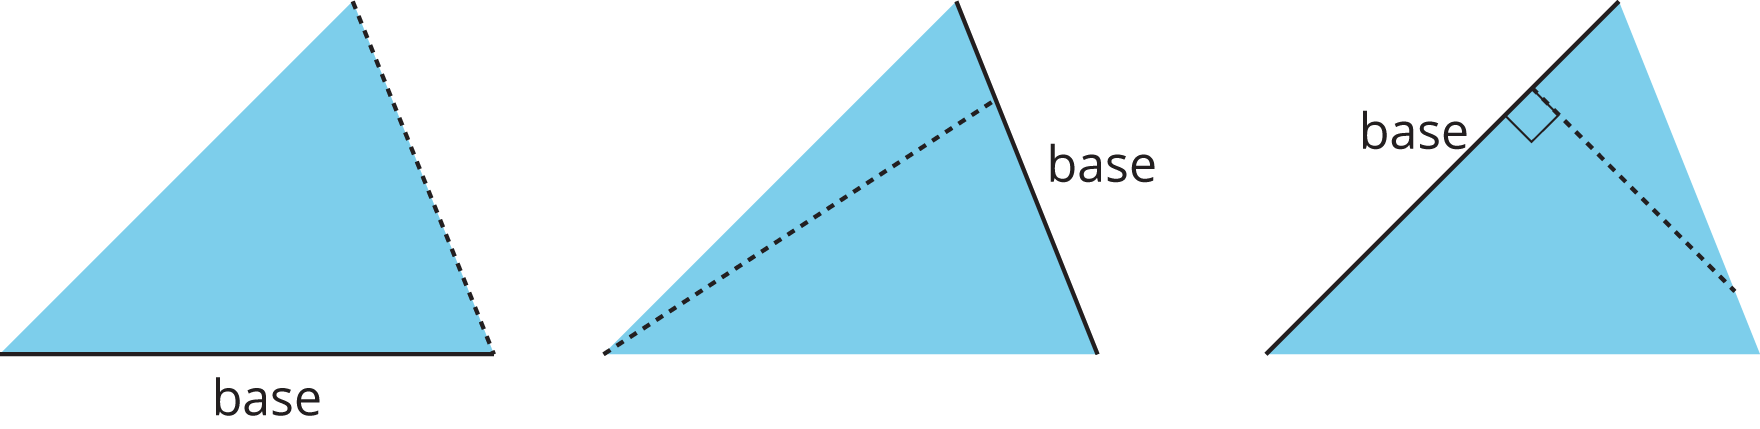 Three copies of a triangle. Each copy has a different side labeled base and a line from the base that is not the height.